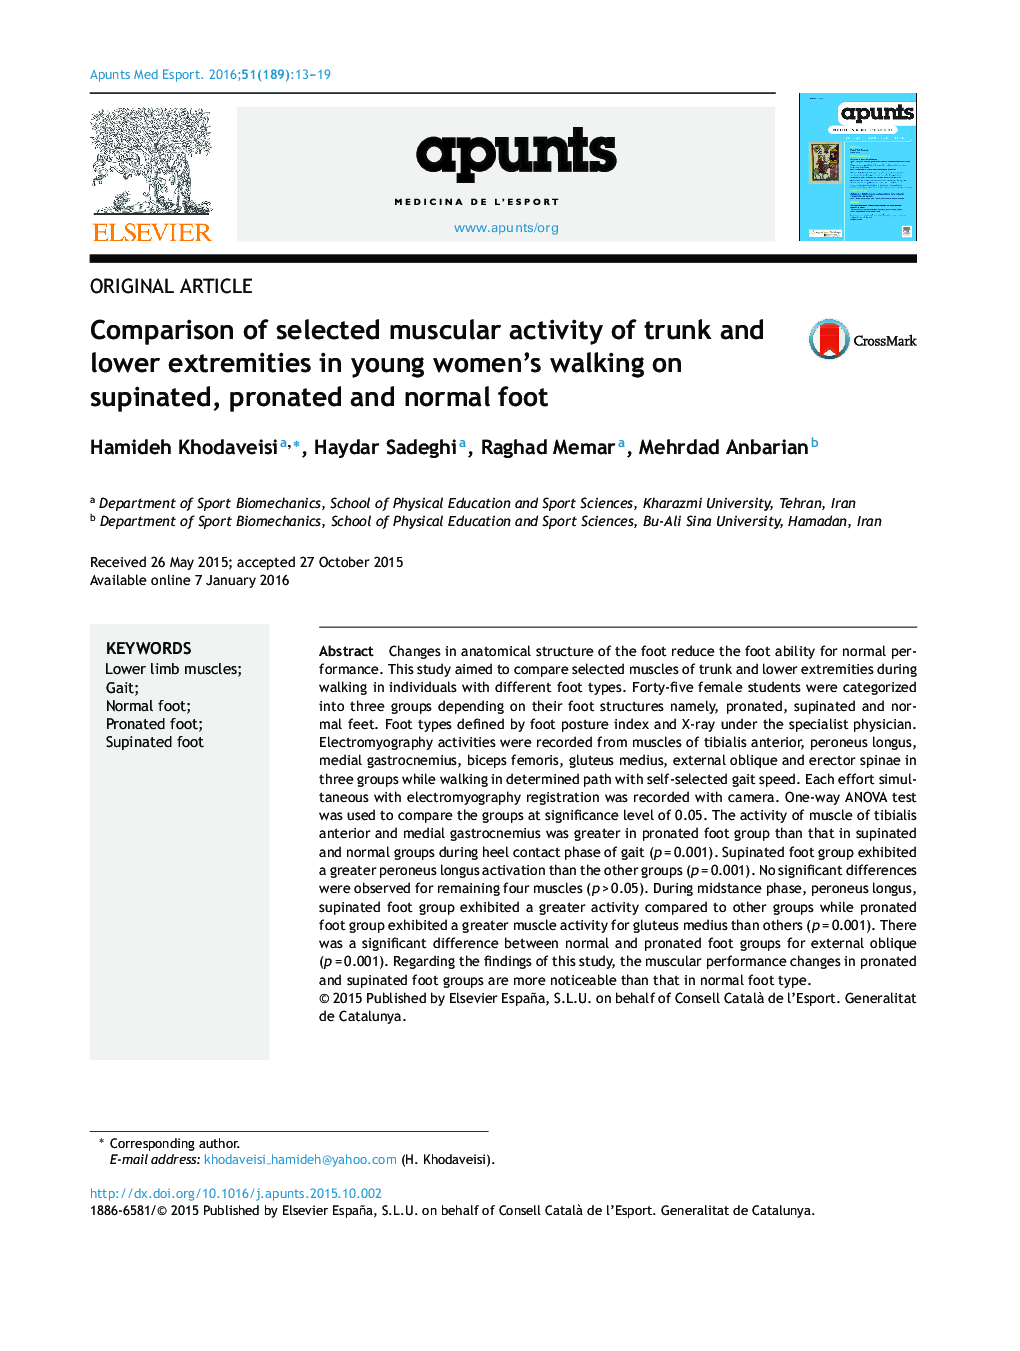 Comparison of selected muscular activity of trunk and lower extremities in young women's walking on supinated, pronated and normal foot